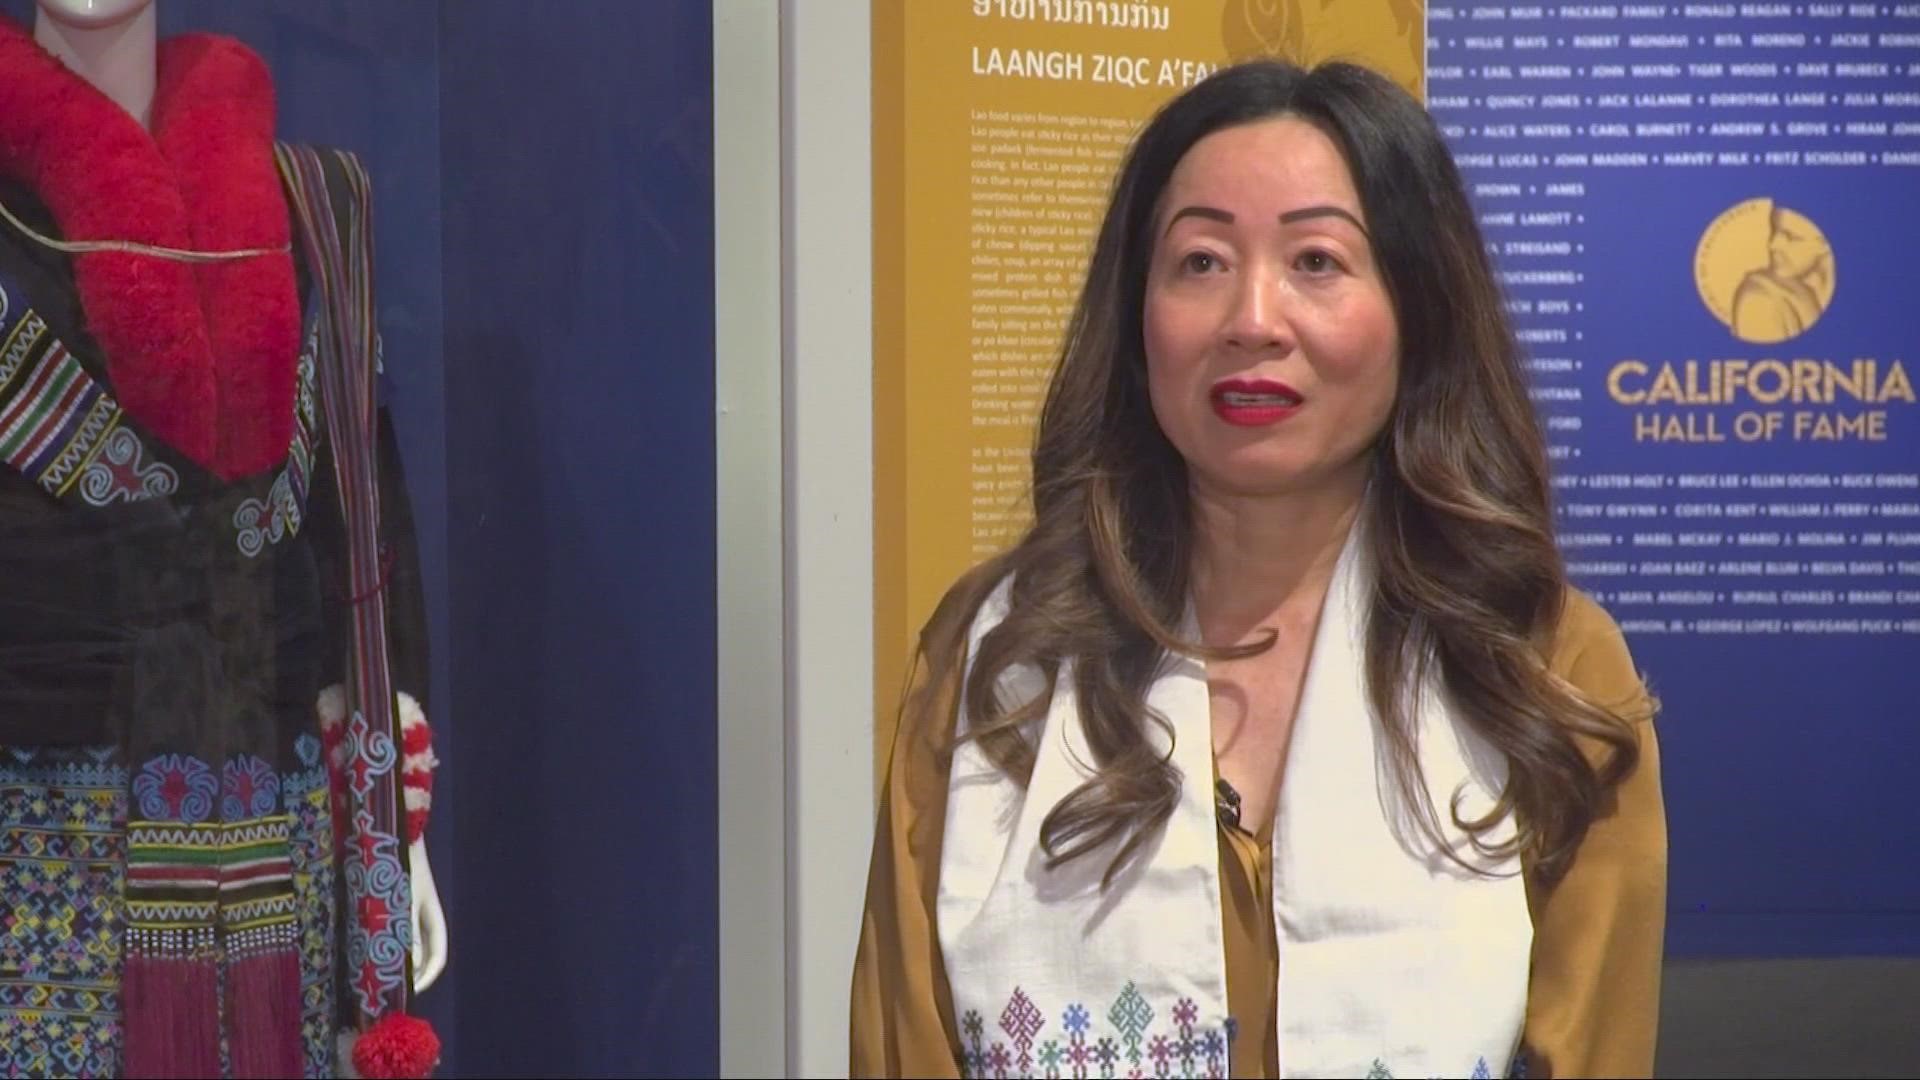 The California Museum in Sacramento is helping reveal untold stories of refugees from Laos in Southeast Asia.